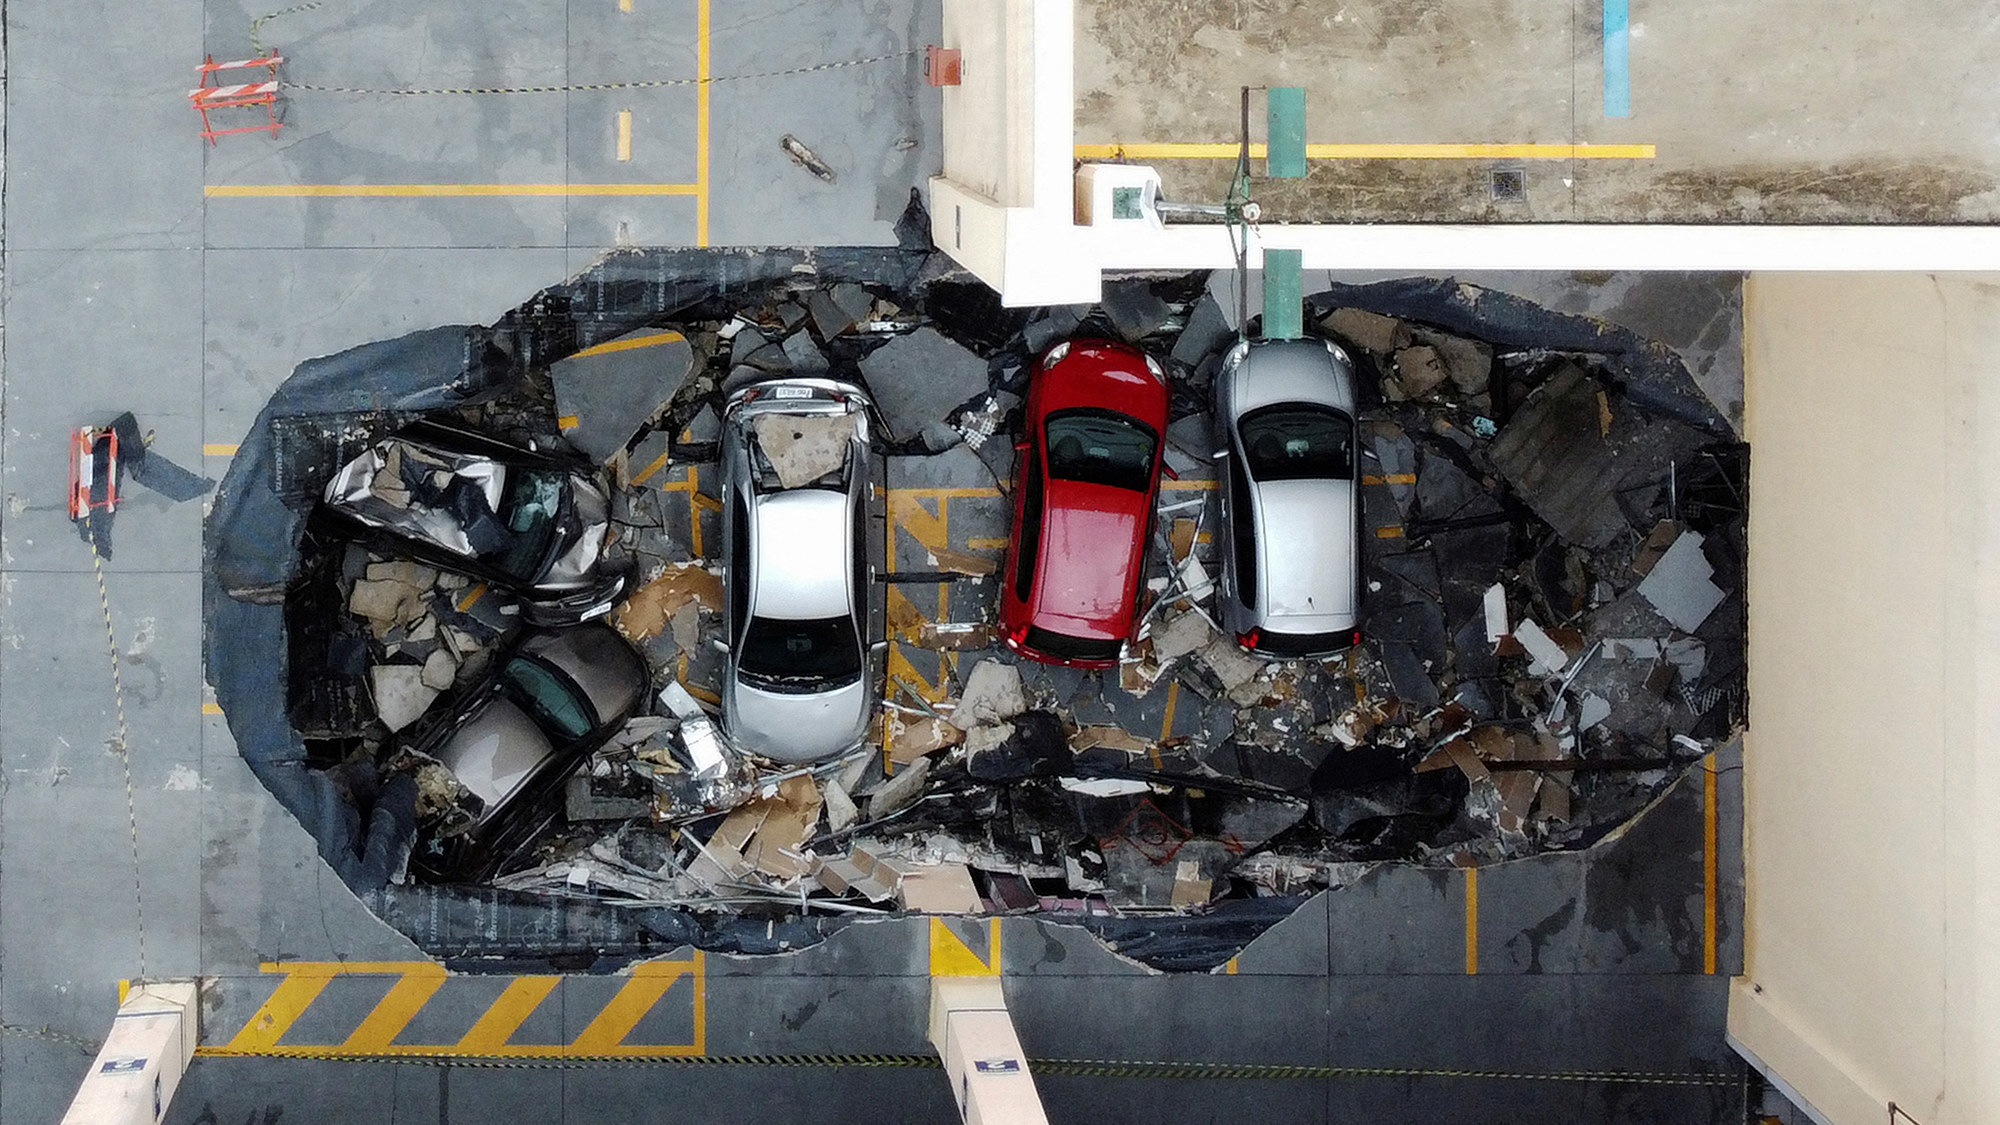 A row of crashed cars in a concrete sinkhole surrounded by rubble